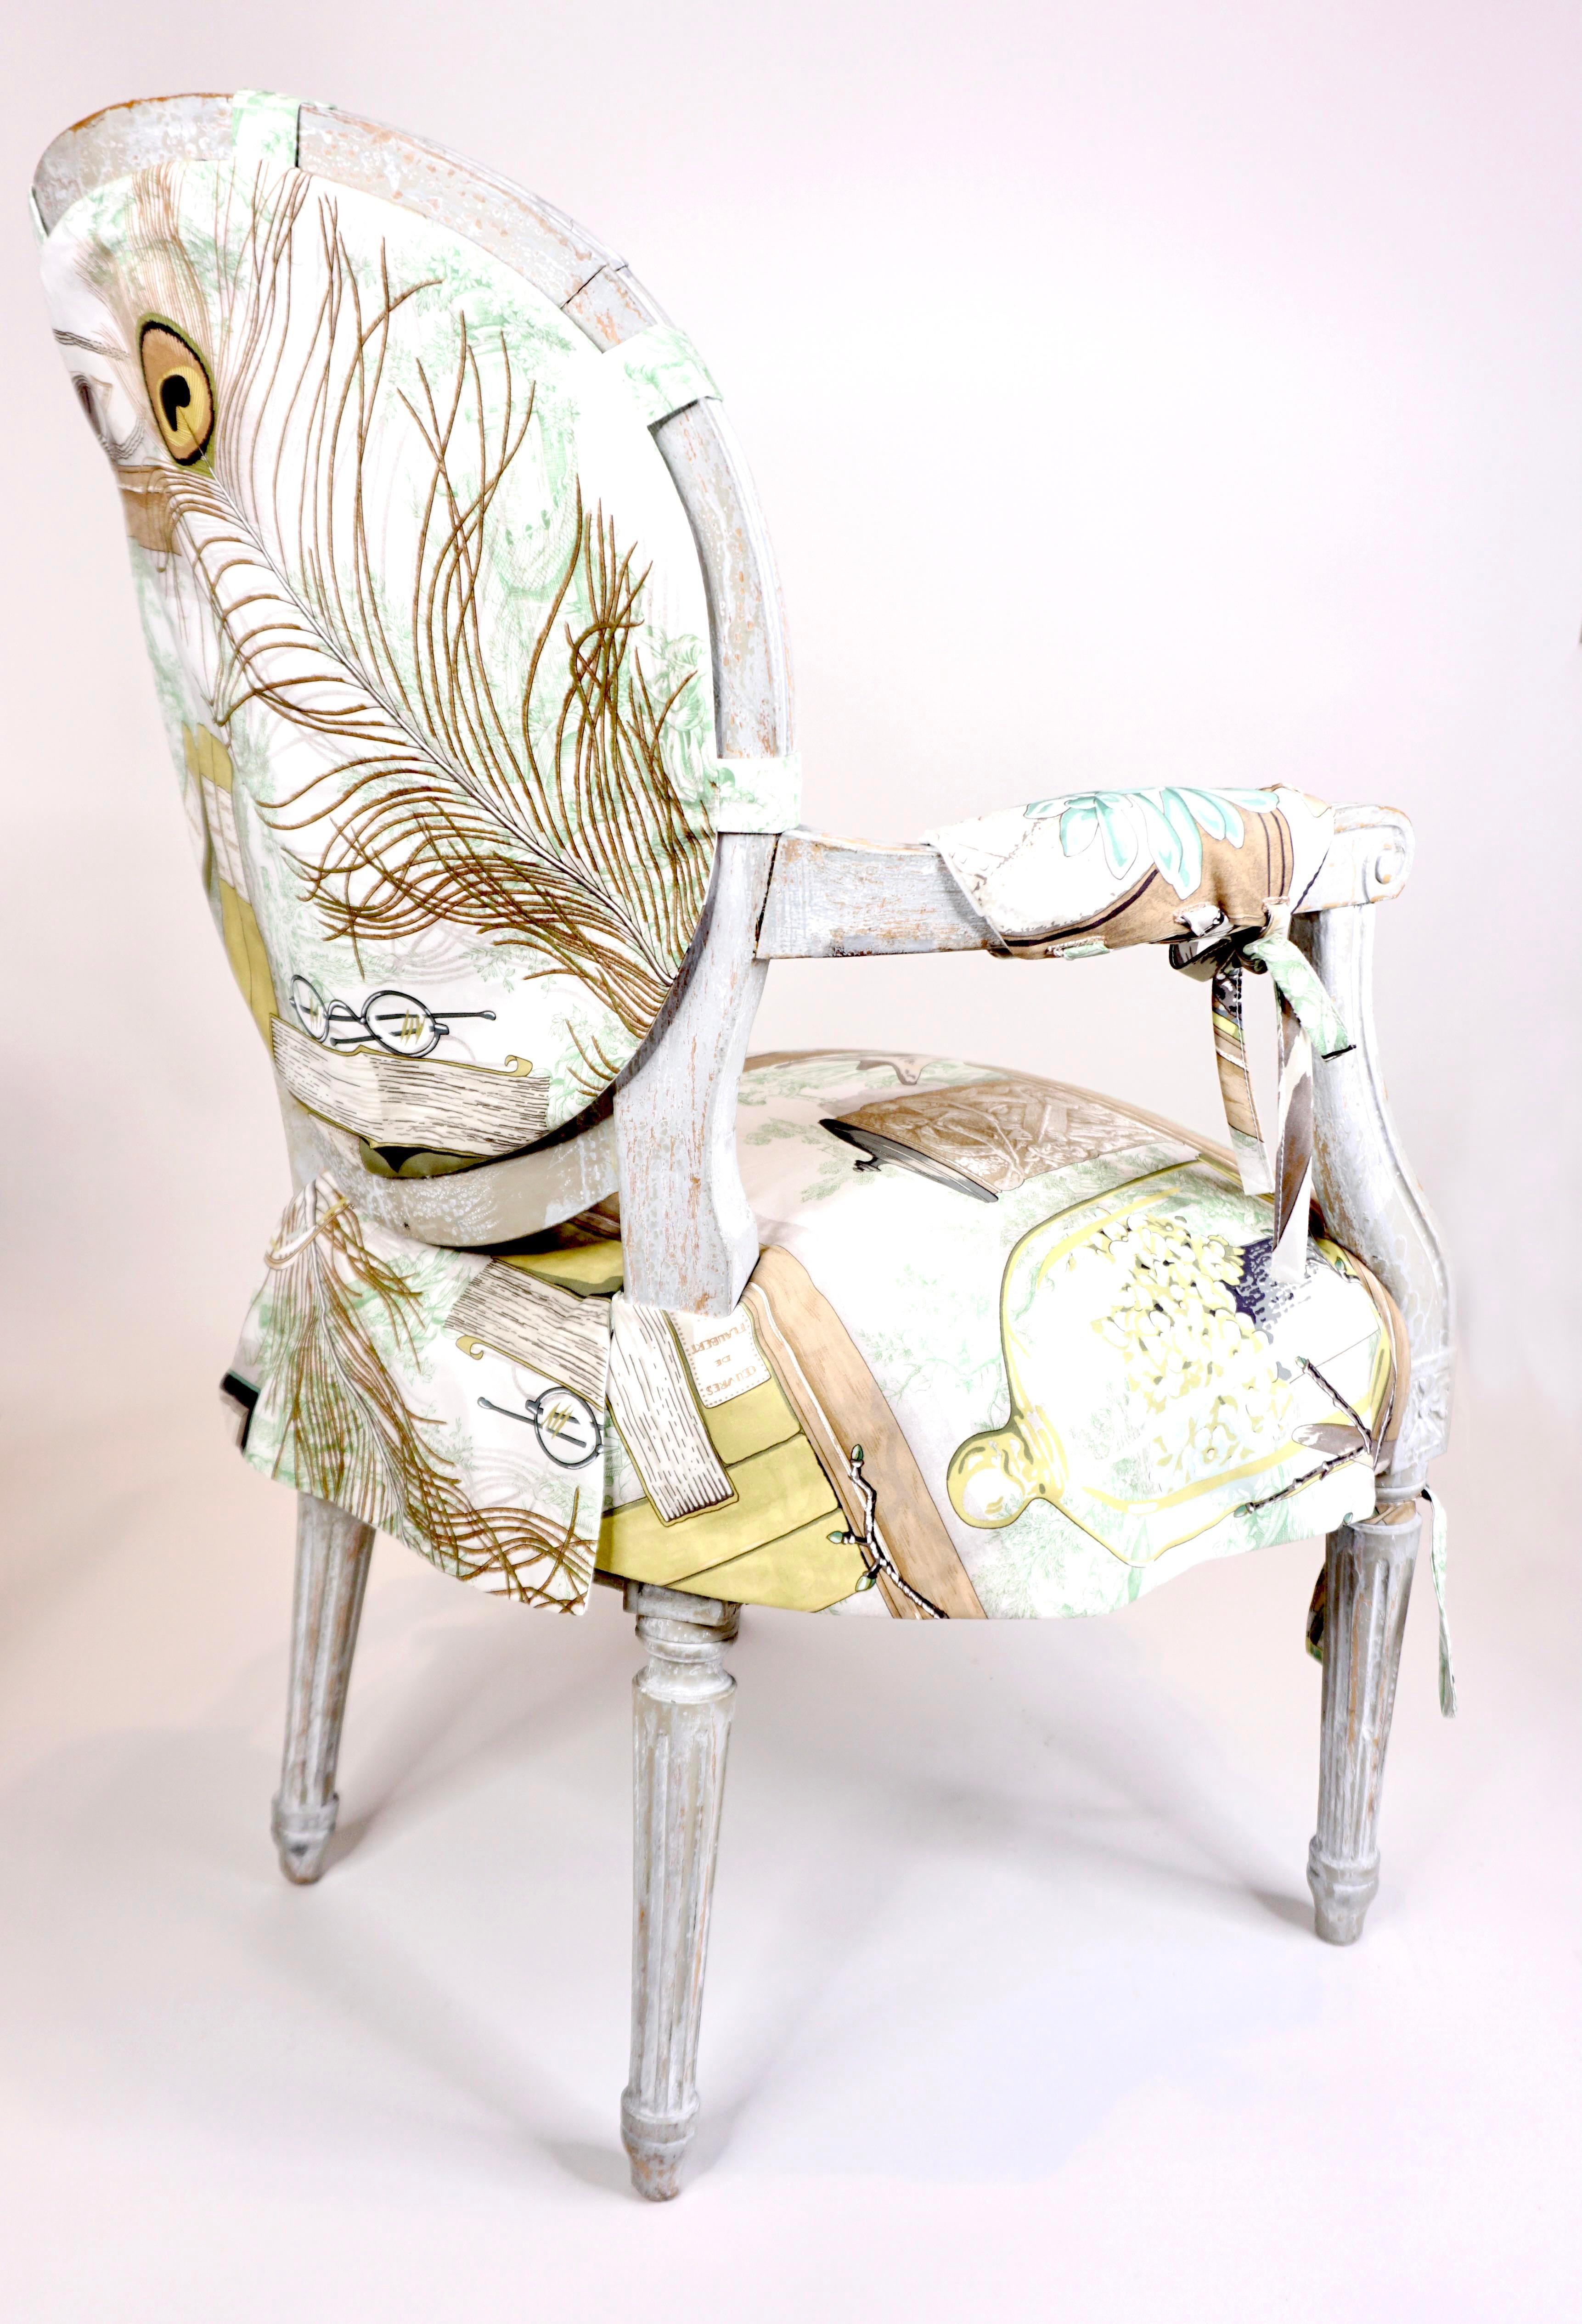 Wood Early 1900's Louis XIV Style Chairs, Slipcovered in Manuel Canovas Fabric For Sale